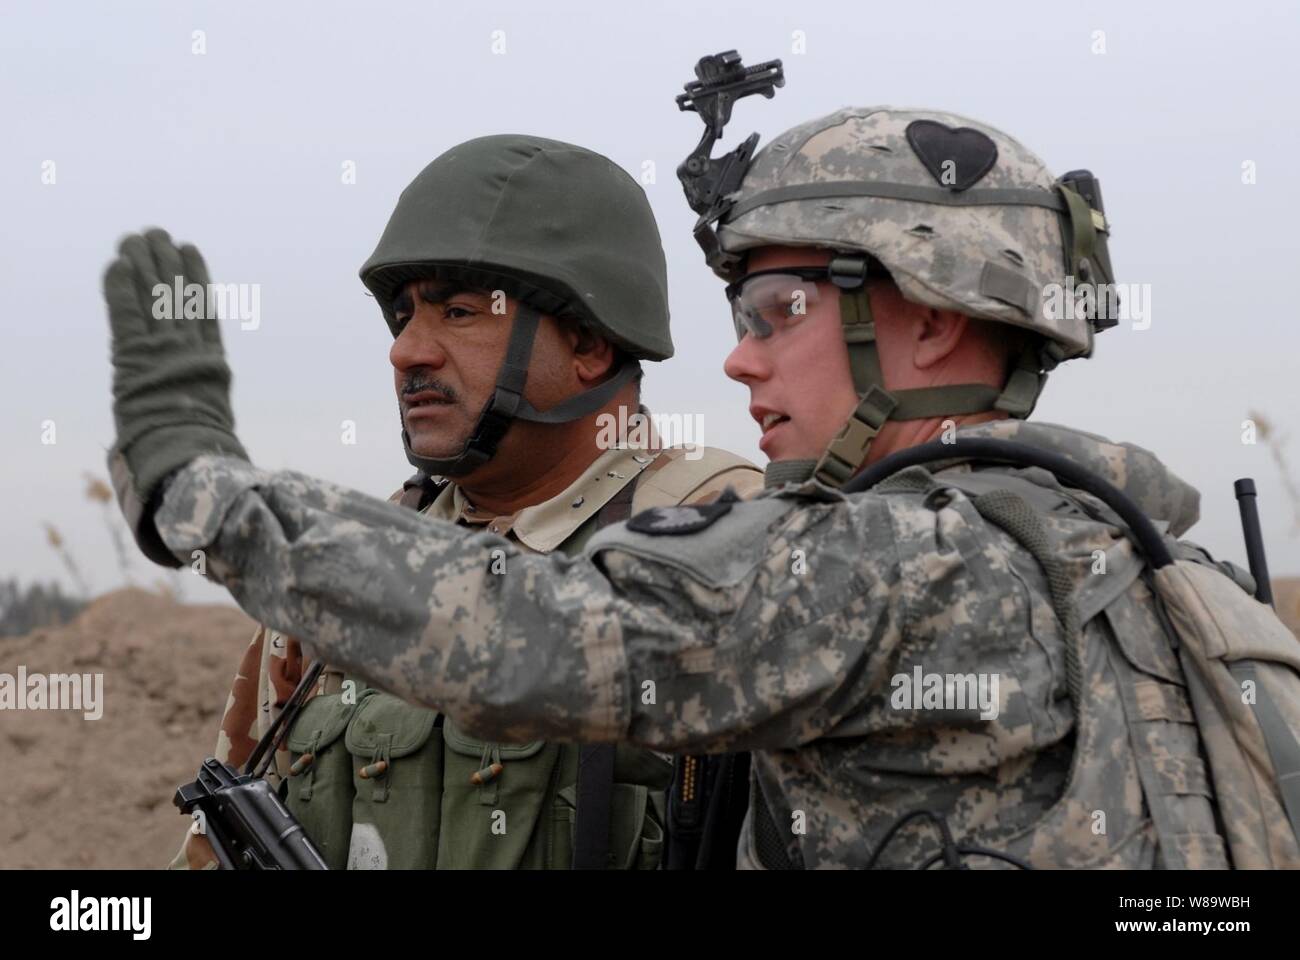 U.S. Army Sgt. 1st Class Calvin Overway talks with an Iraqi army soldier during a mission to clear insurgents from the Chaka Four region south of Baghdad, Iraq, on Jan. 10, 2008.  Overway is attached to Charlie Company, 2nd Battalion, 502nd Infantry Regiment, 2nd Brigade Combat Team, 101st Airborne Division. Stock Photo